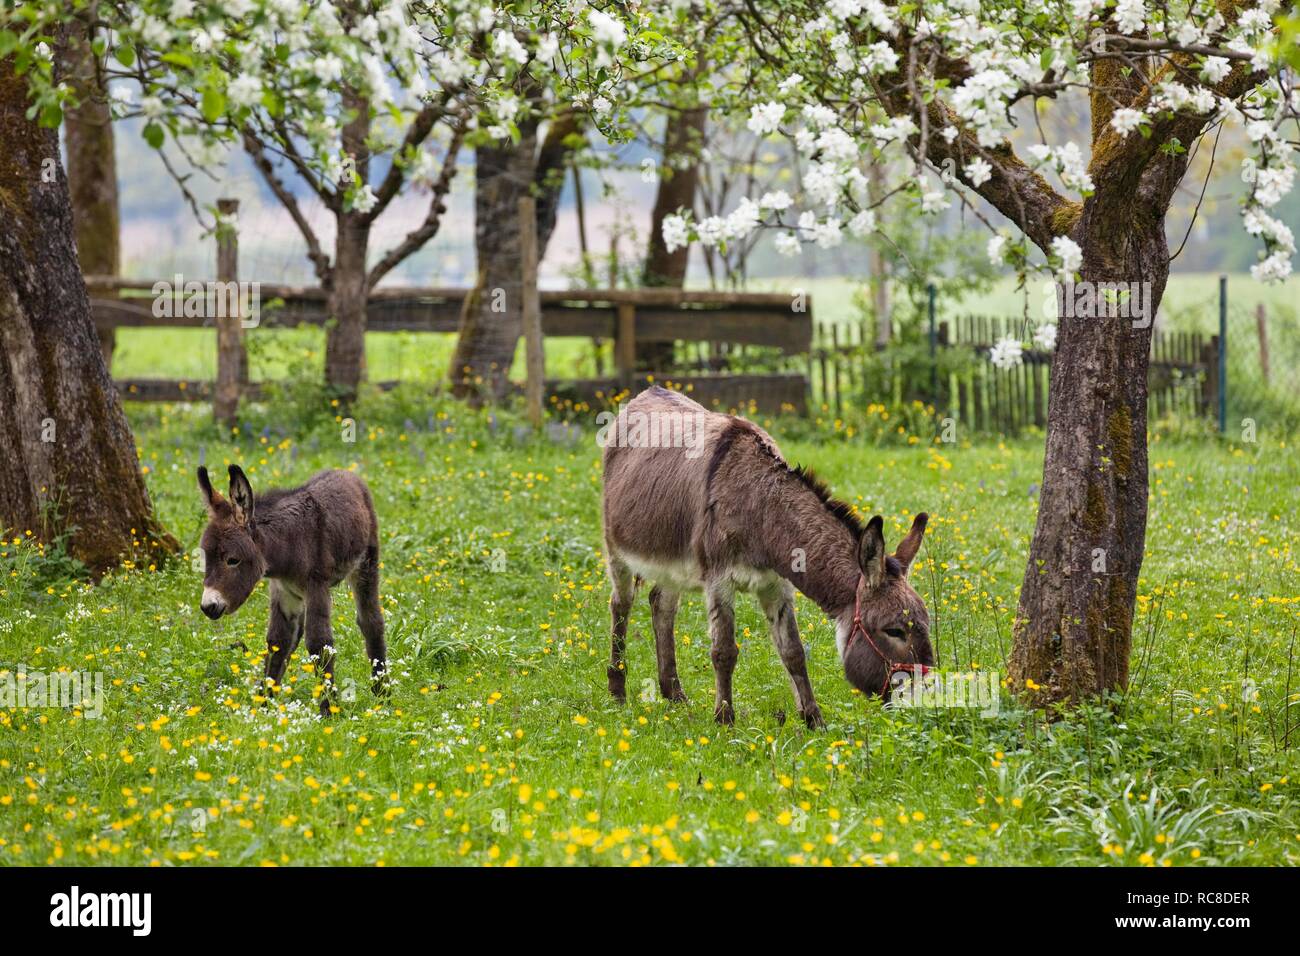 Donkey (Equus asinus) with foal in orchard, spring, Bavaria, Germany Stock Photo